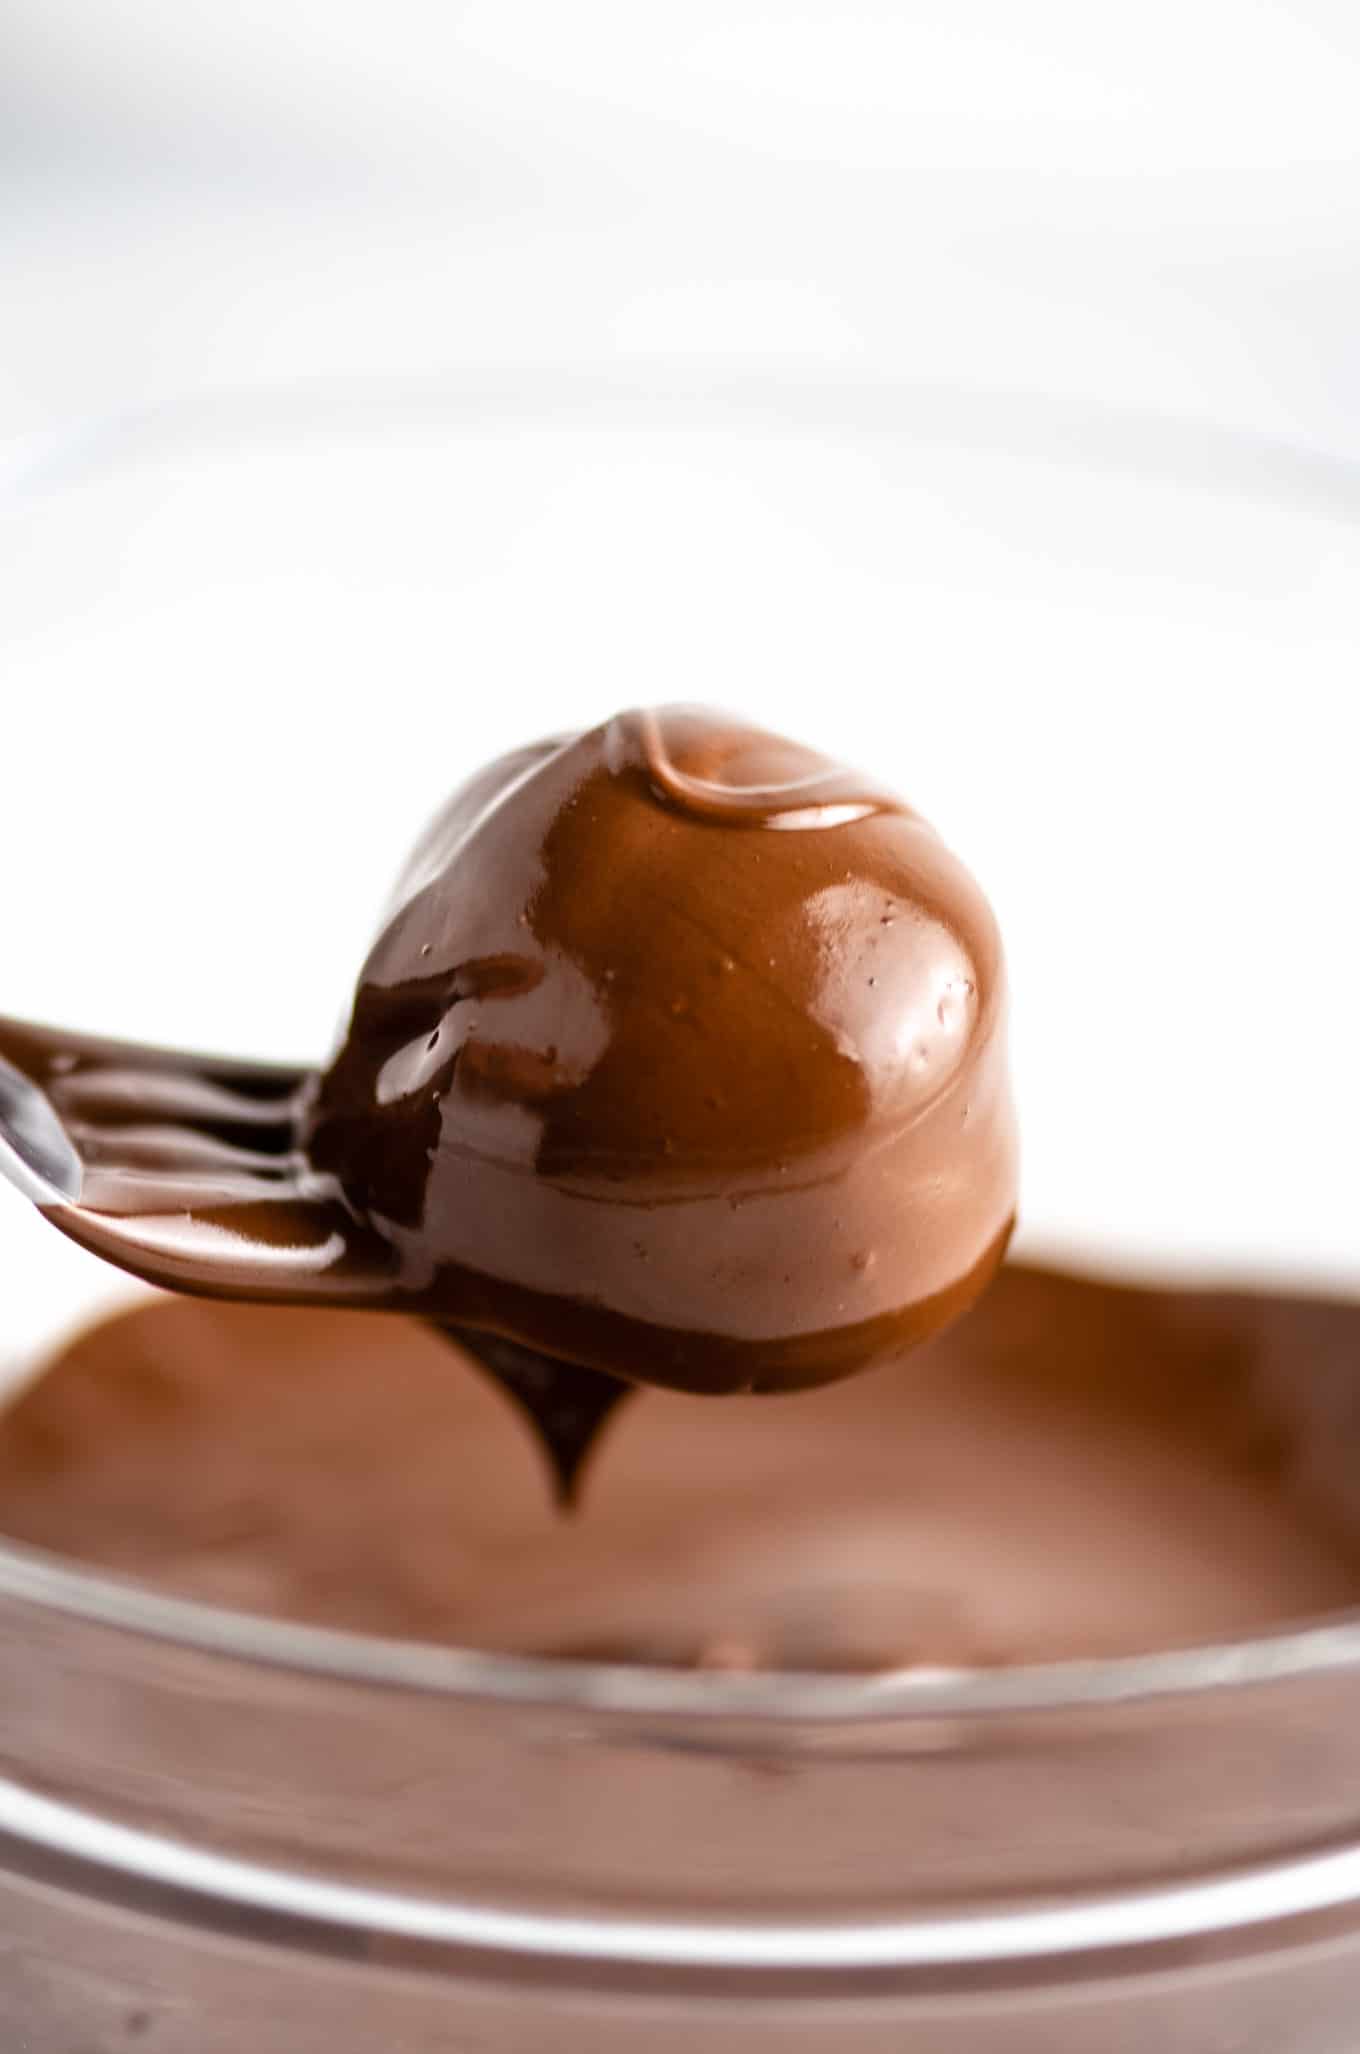 dipping truffles in chocolate